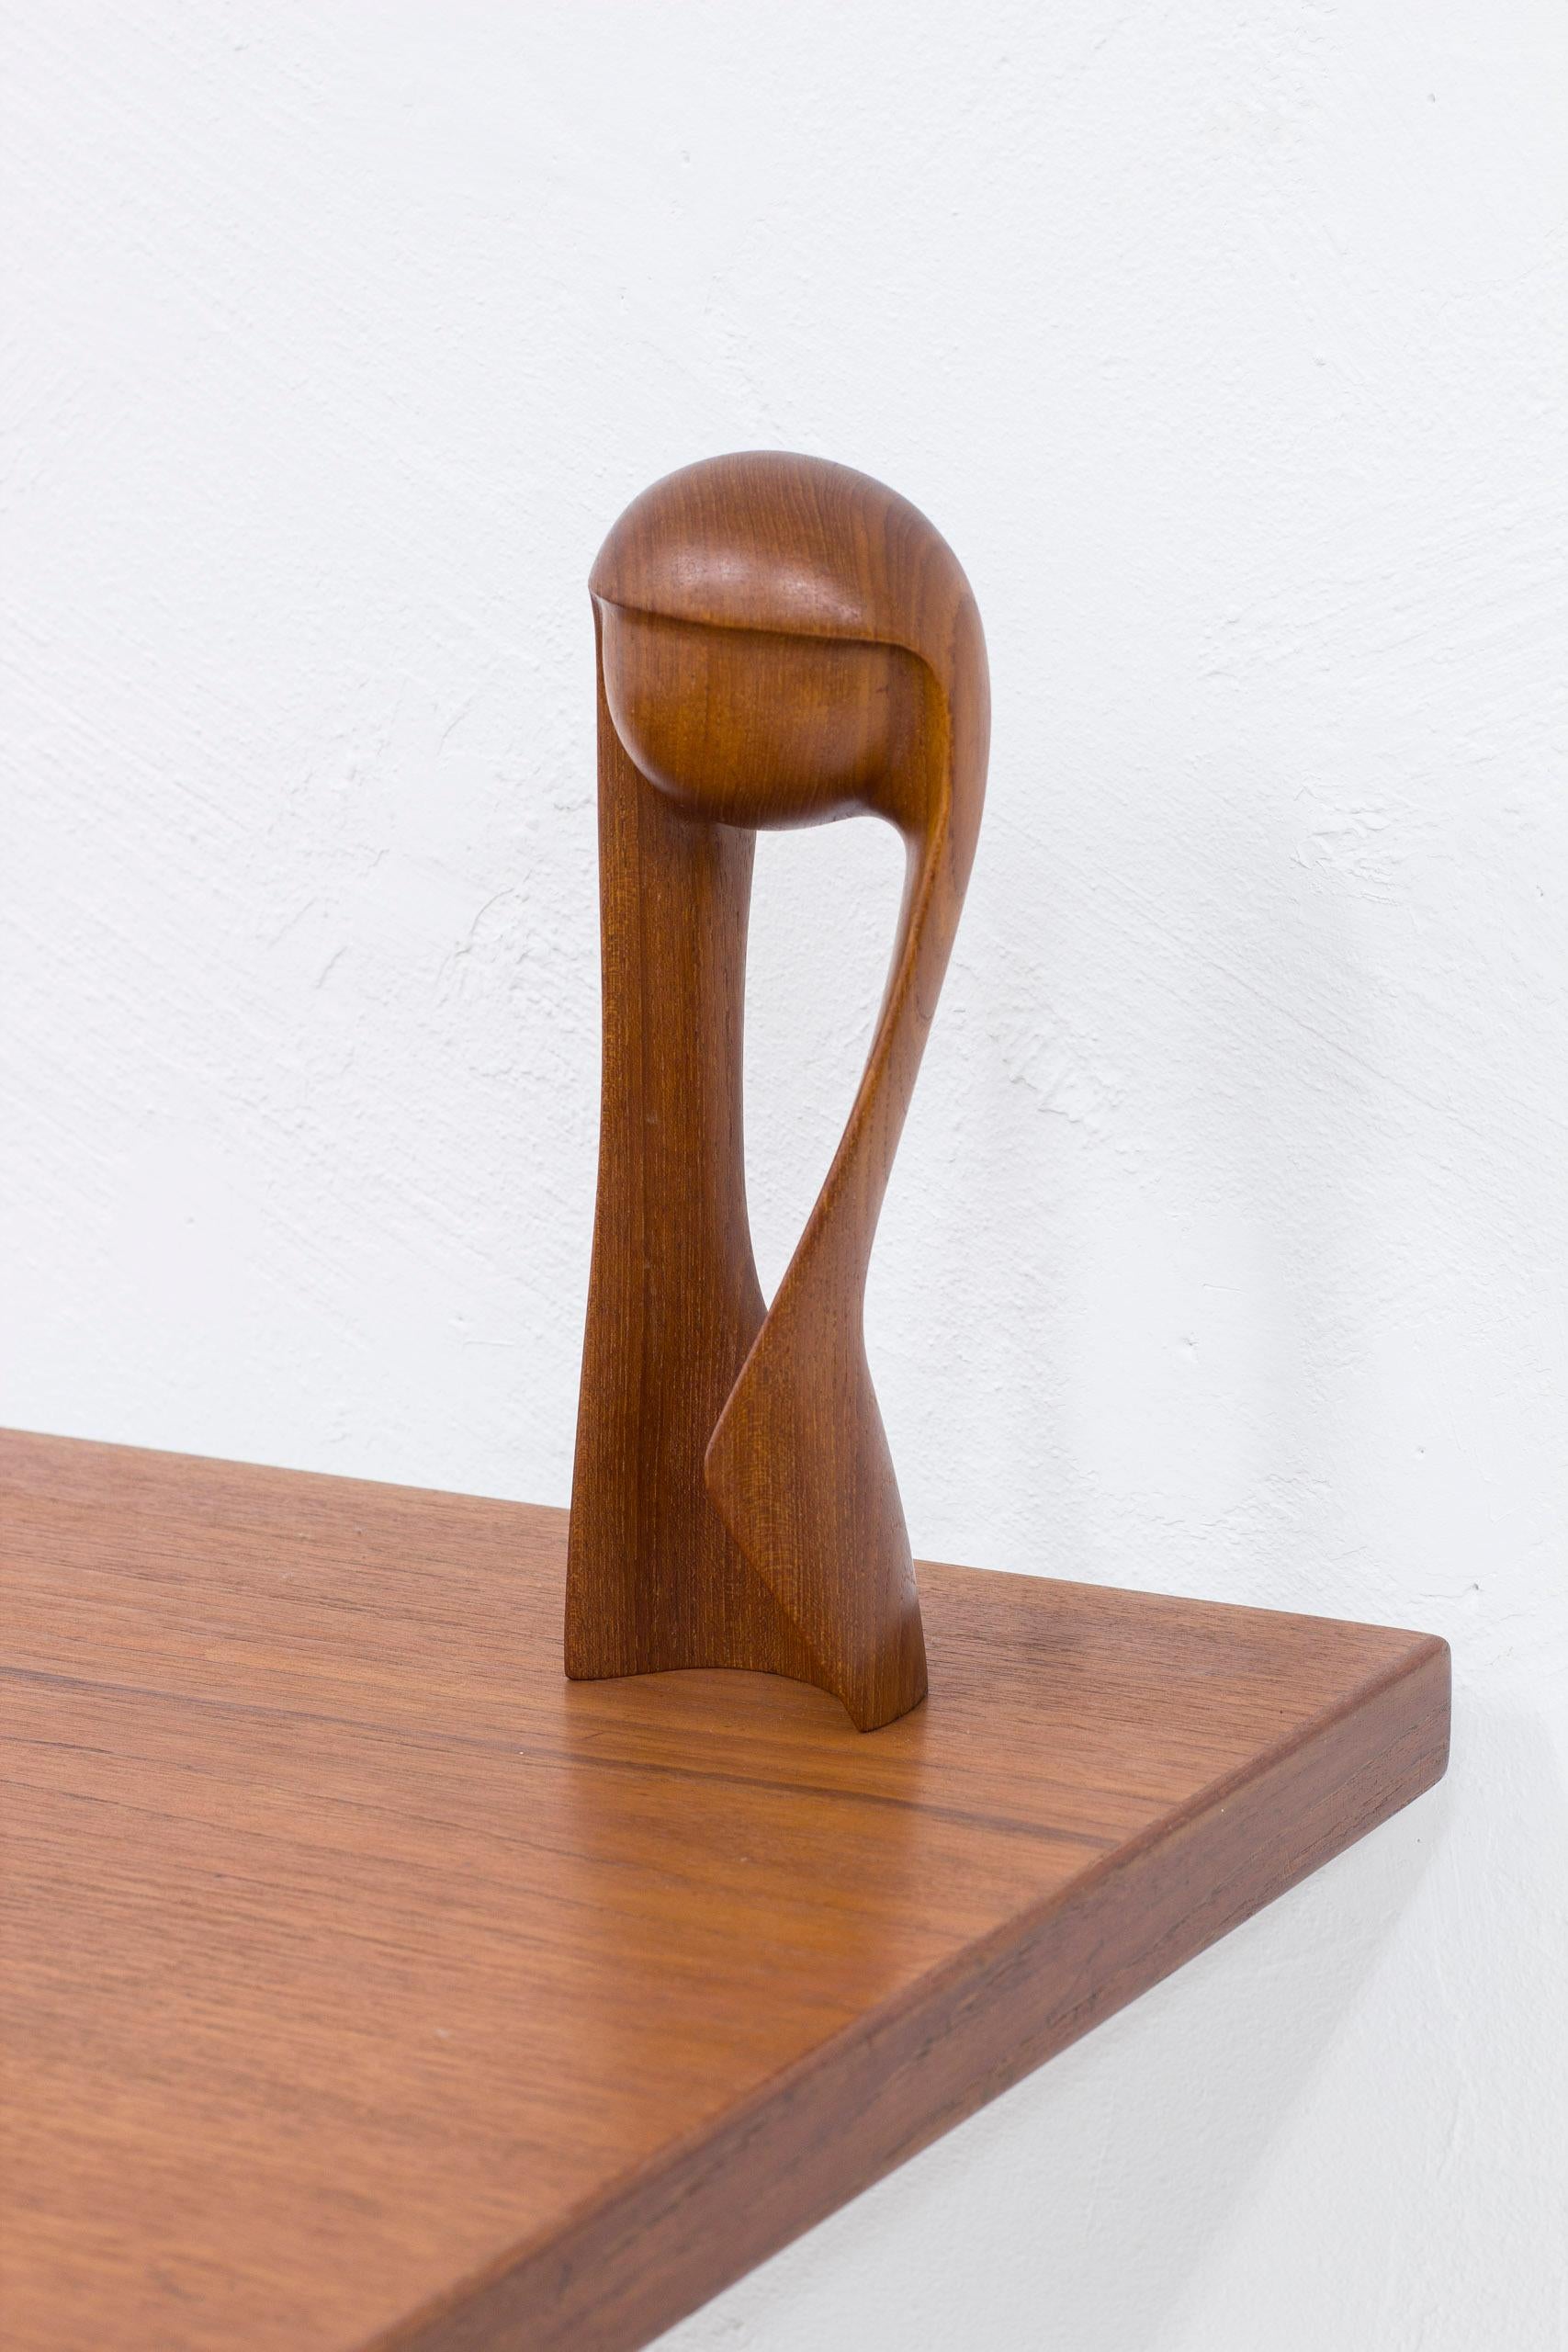 Sculpture made by Simon Randers. Produced in Denmark during the 1950s. Hand sculpted out of solid teak. Very good vintage condition with slight age related wear and patina.



Designer: Simon Randers

Manufacturer: Simon Randers

Year: